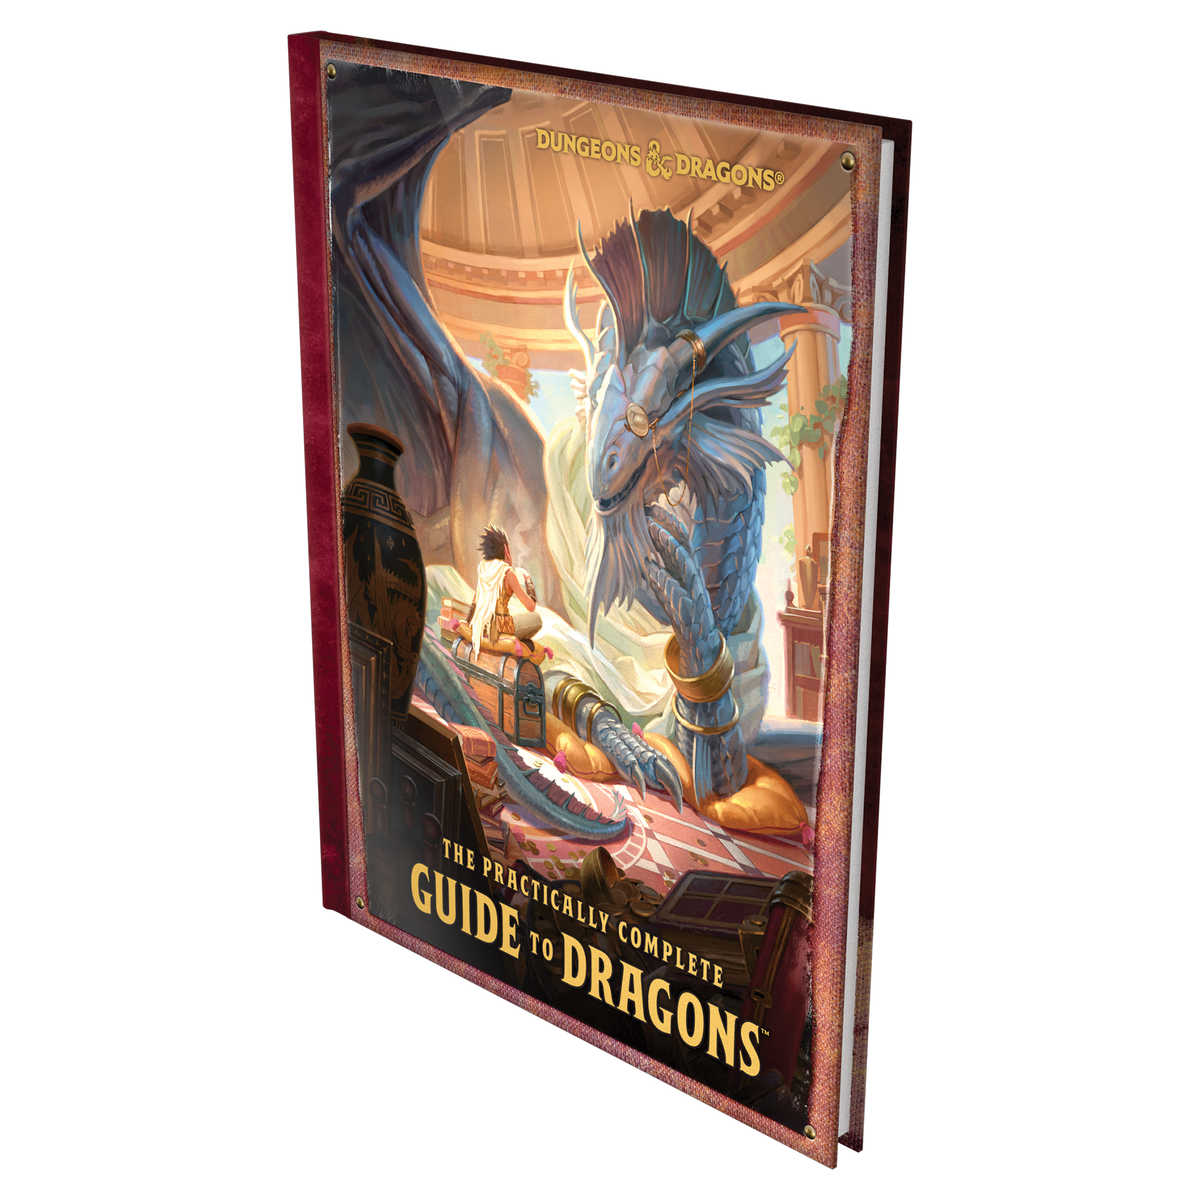 D&amp;D The Practically Complete Guide to Dragons